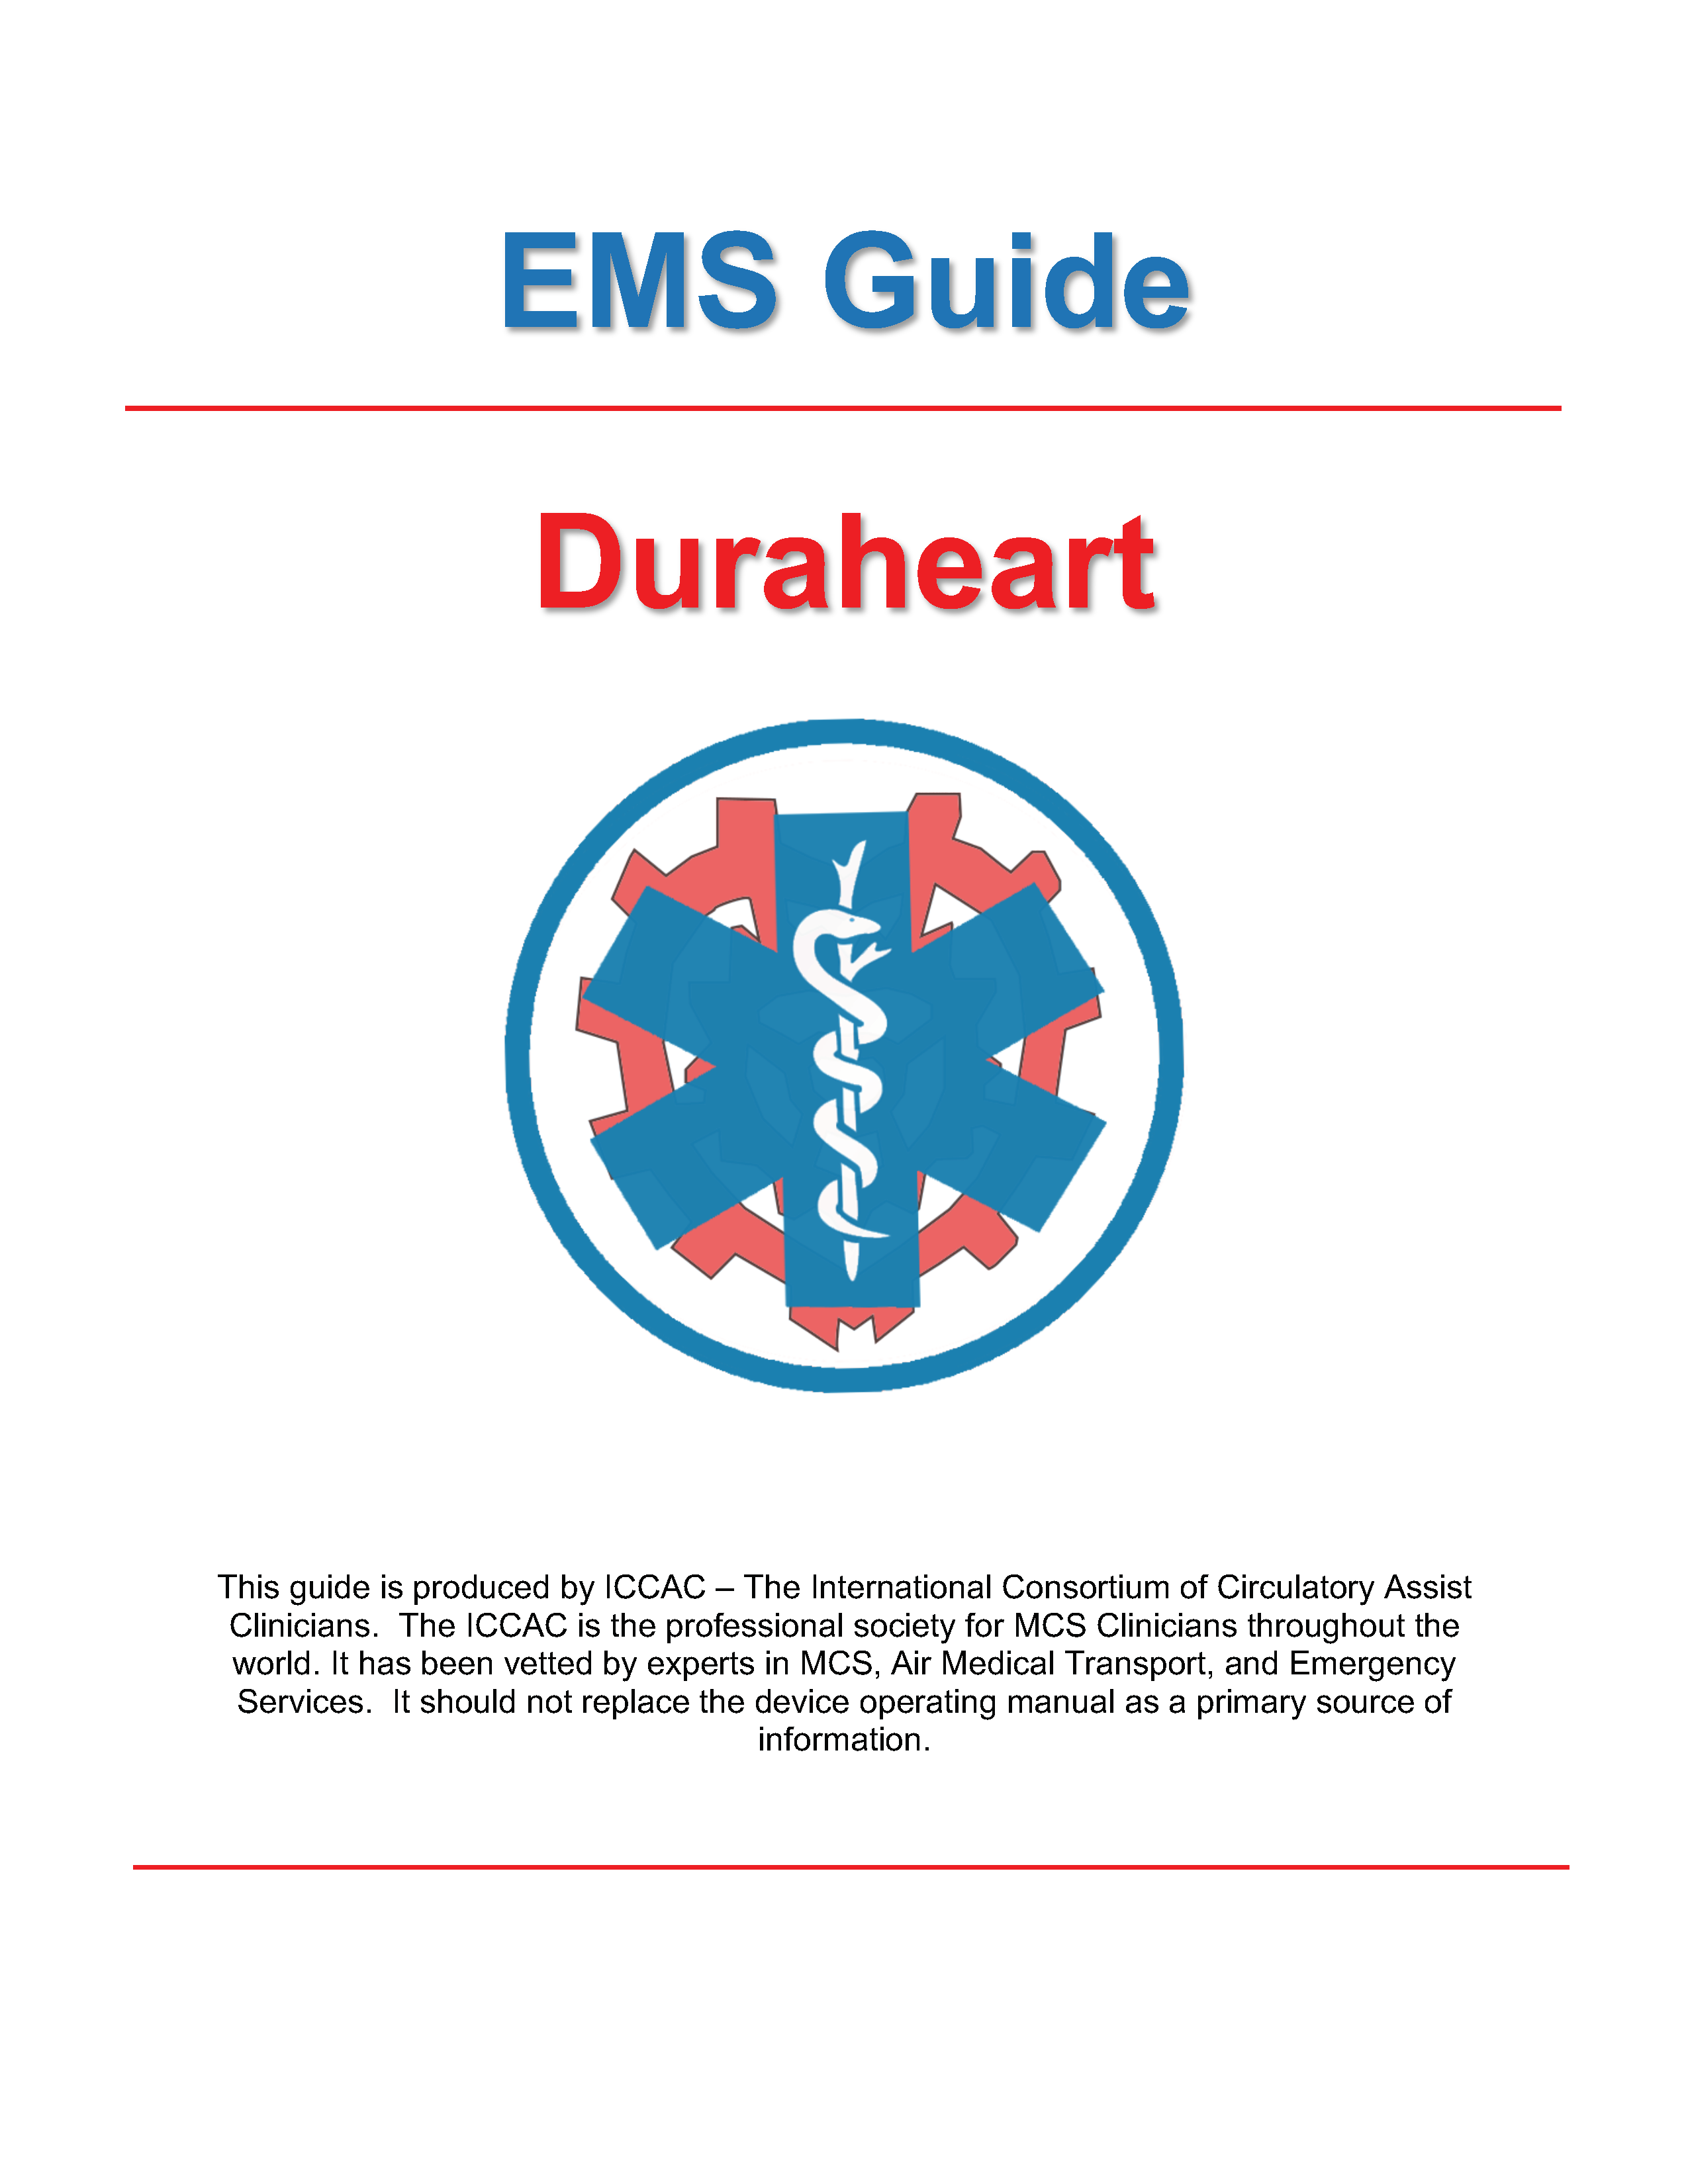 Duraheart EMS cover.png